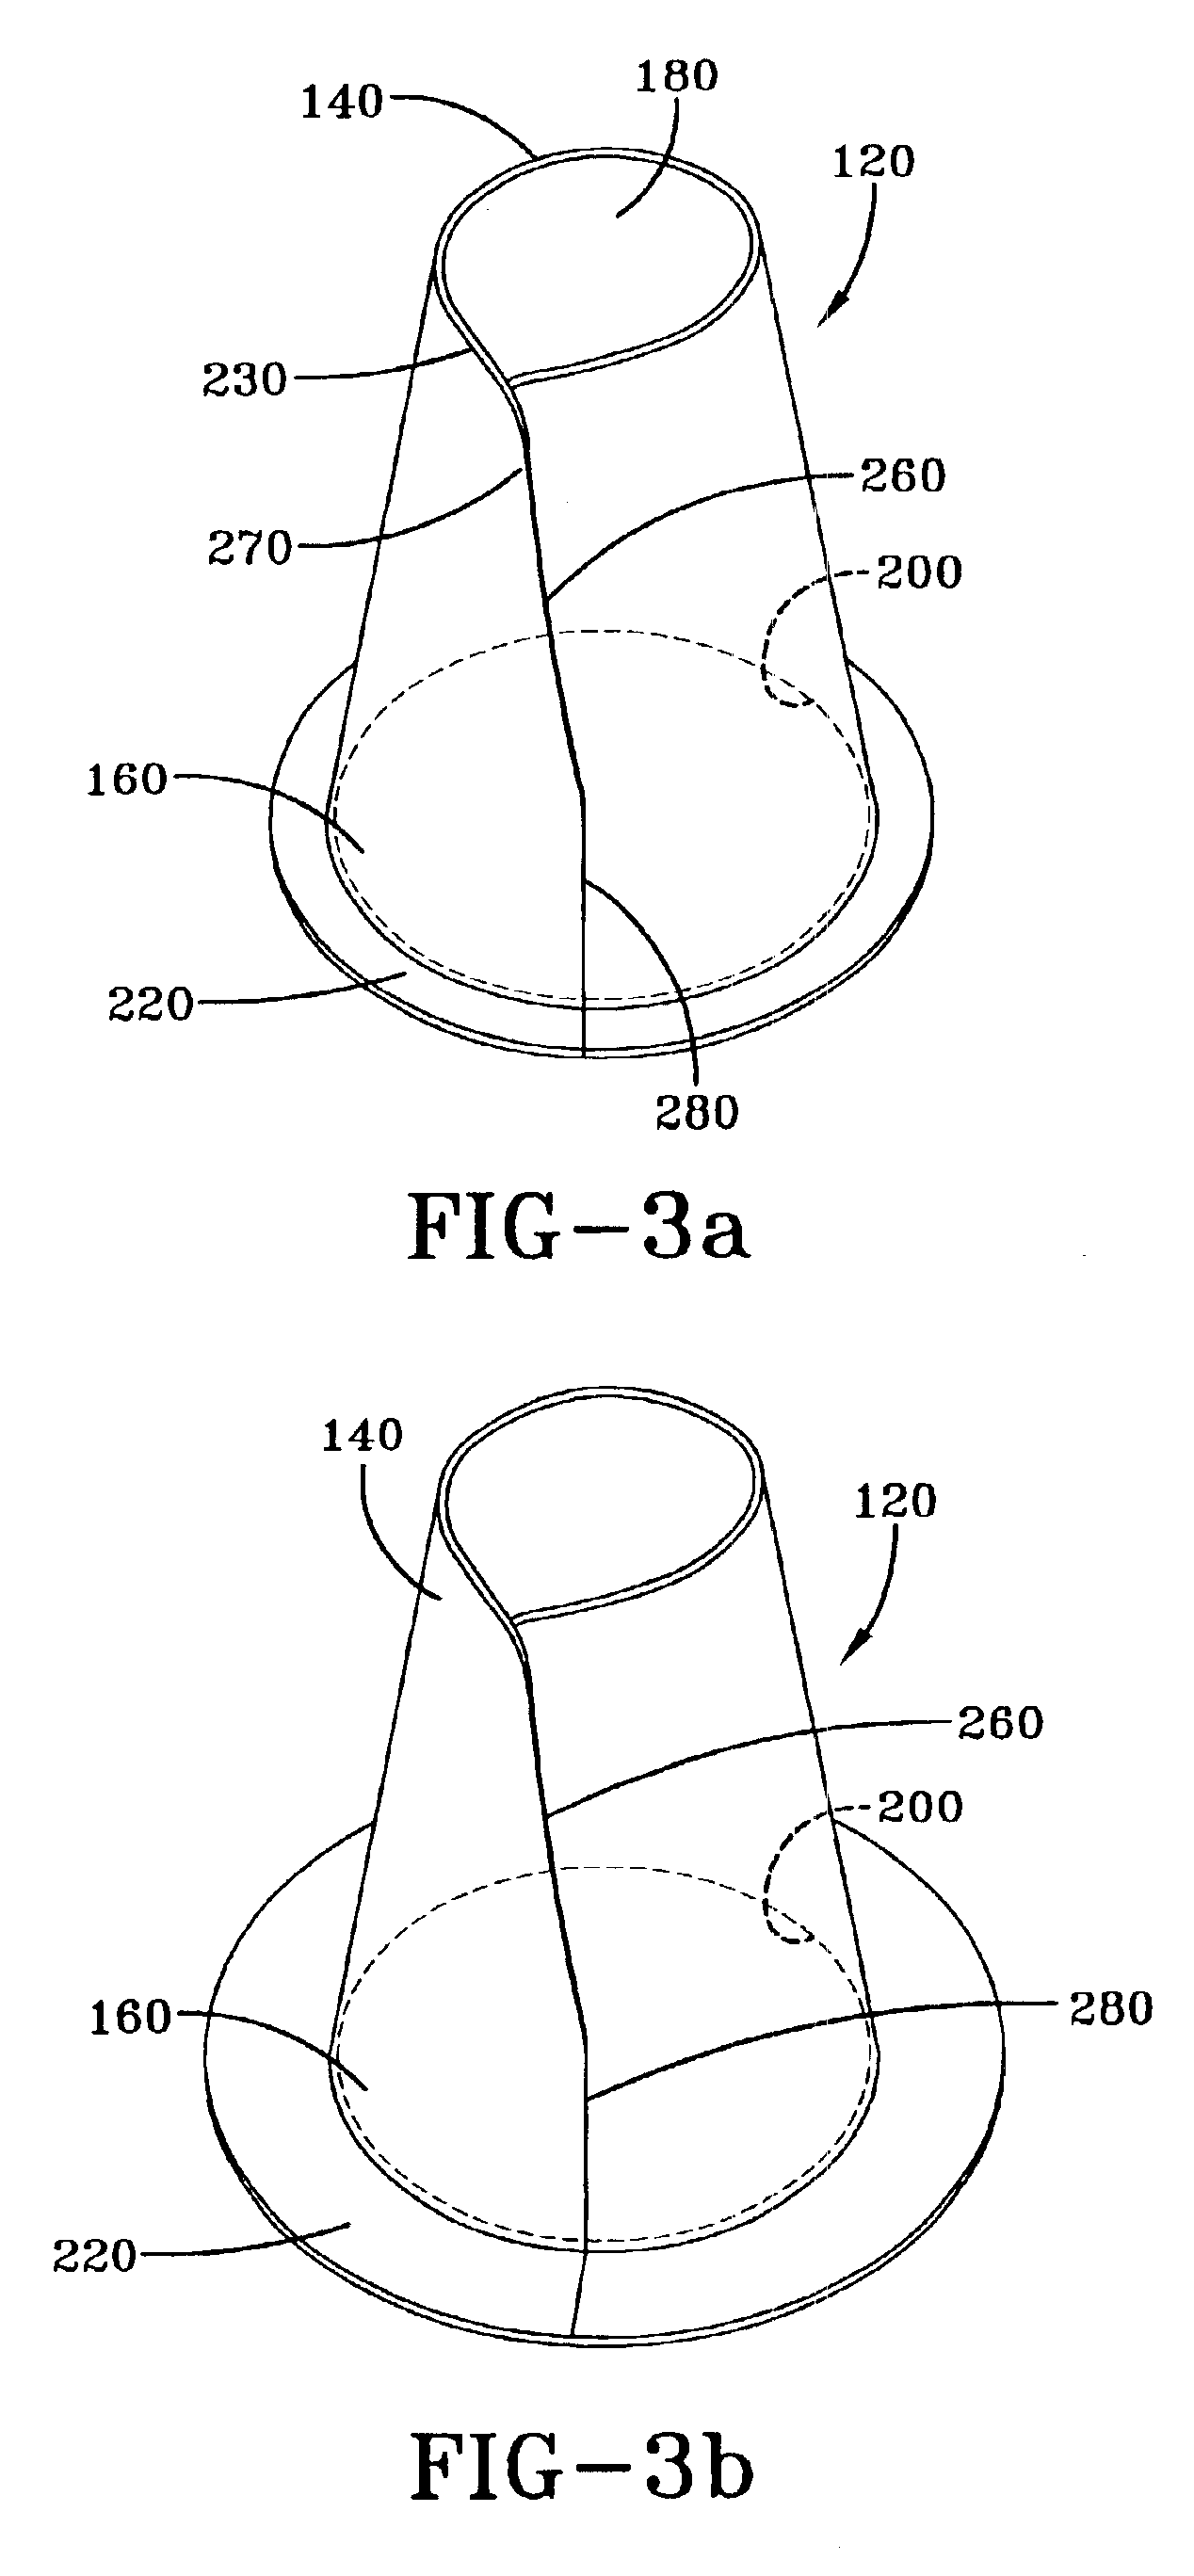 Apparatus and method for sealing a vertical protrusion on a roof